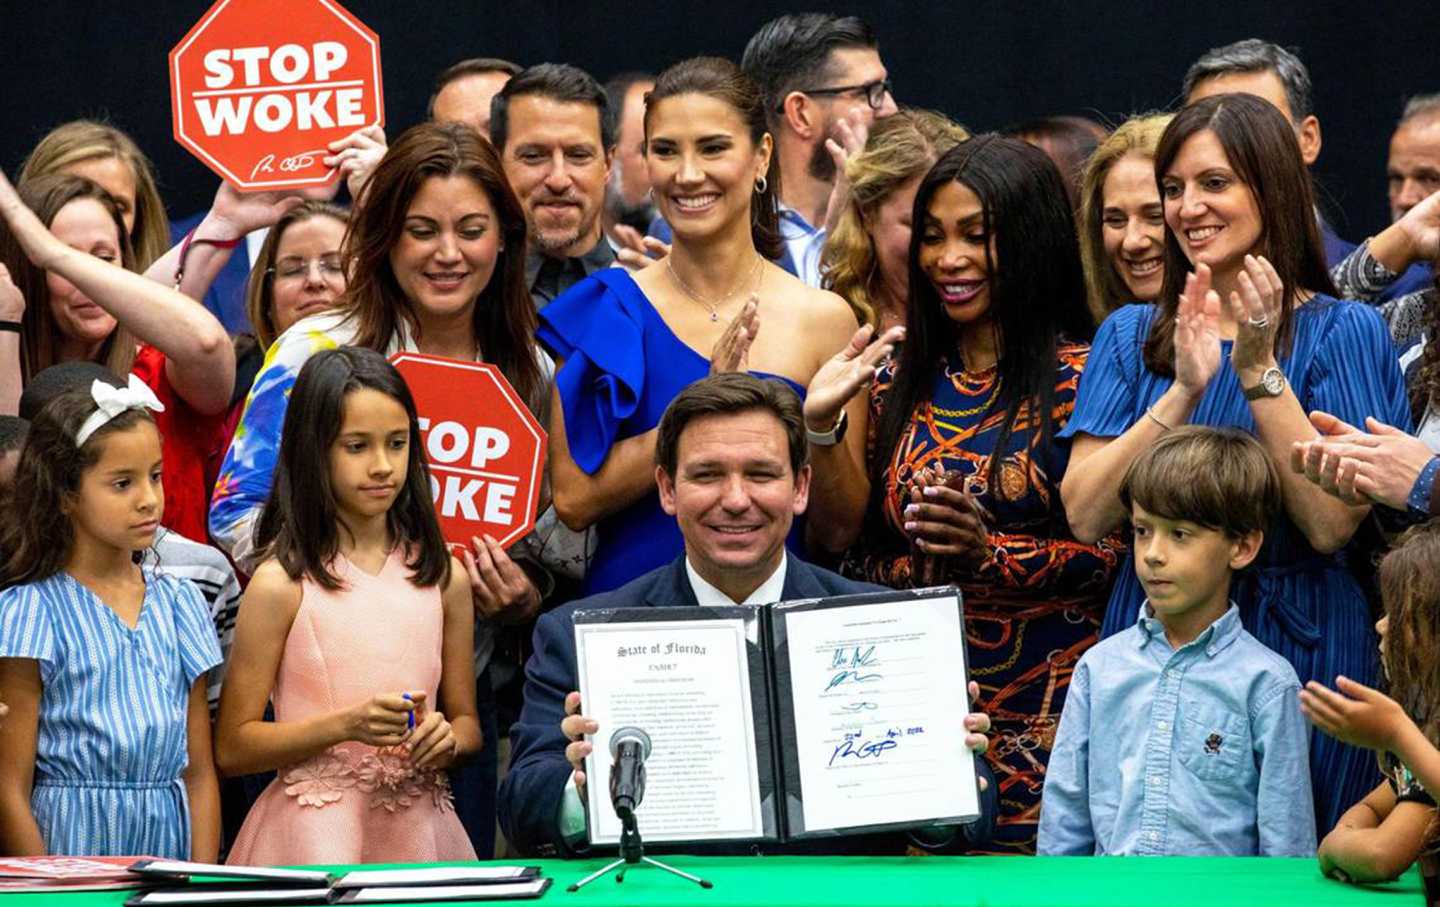 Ron DeSantis at center, surrounded by children and adults holding 